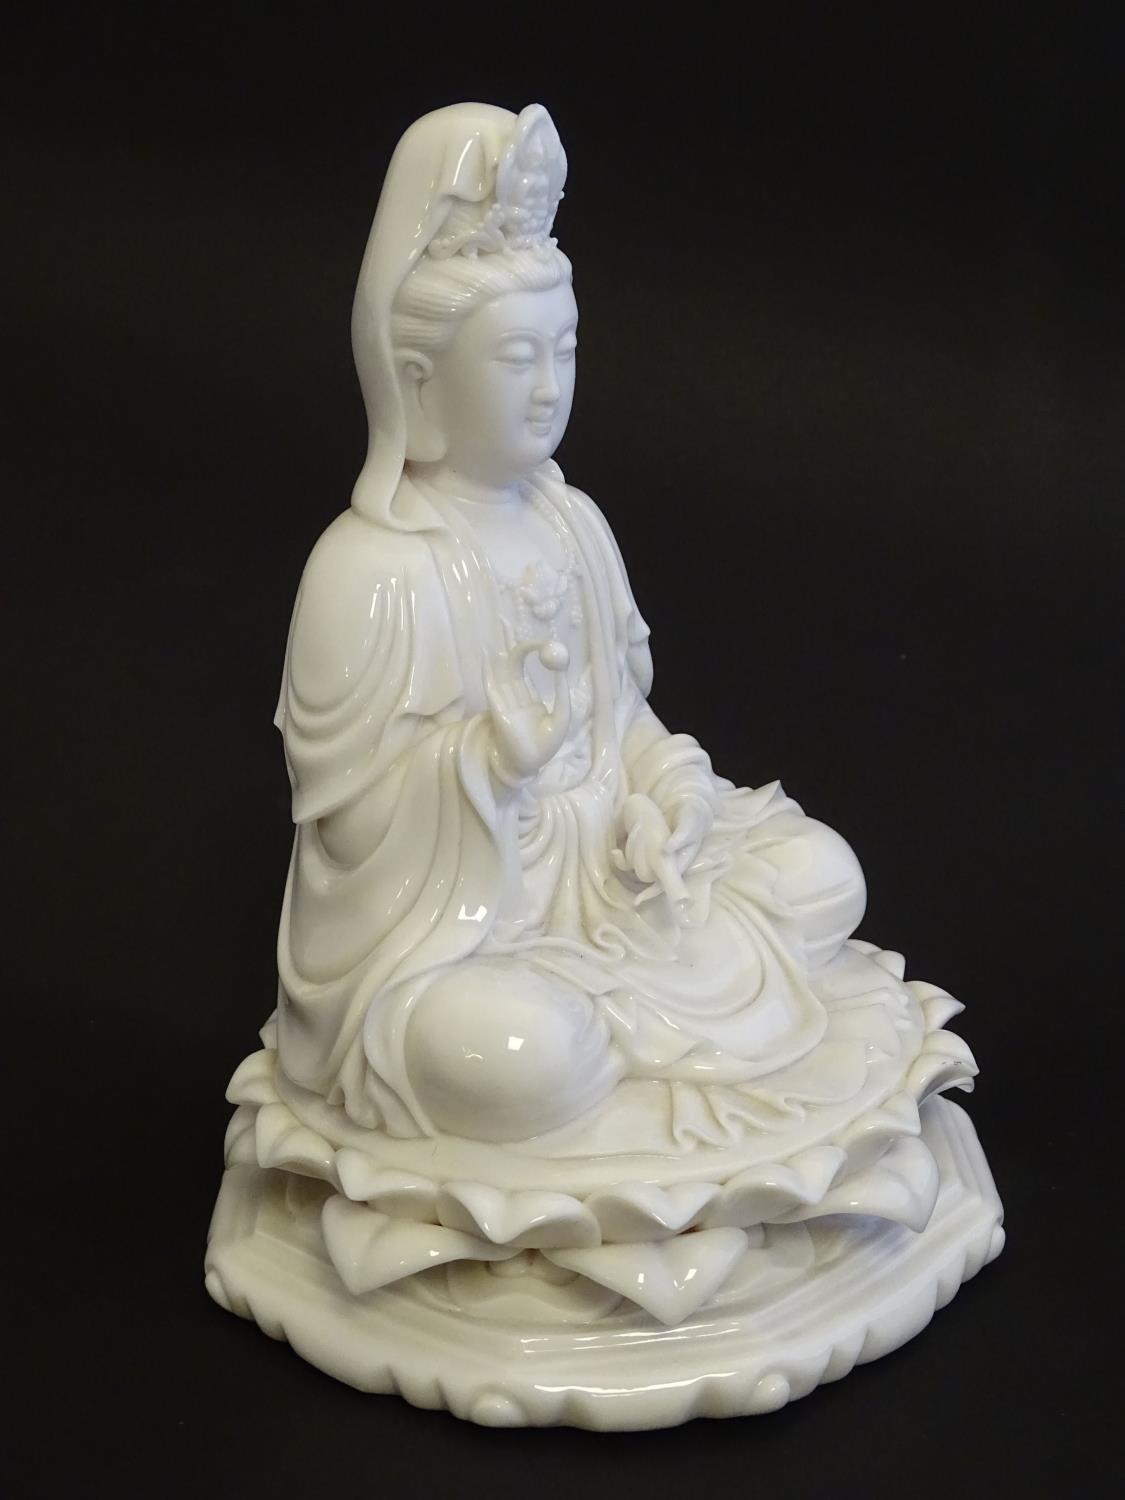 A Chinese blanc de chine figure depicting Guanyin seated on a lotus flower base. Approx. 7 1/2" high - Image 11 of 16